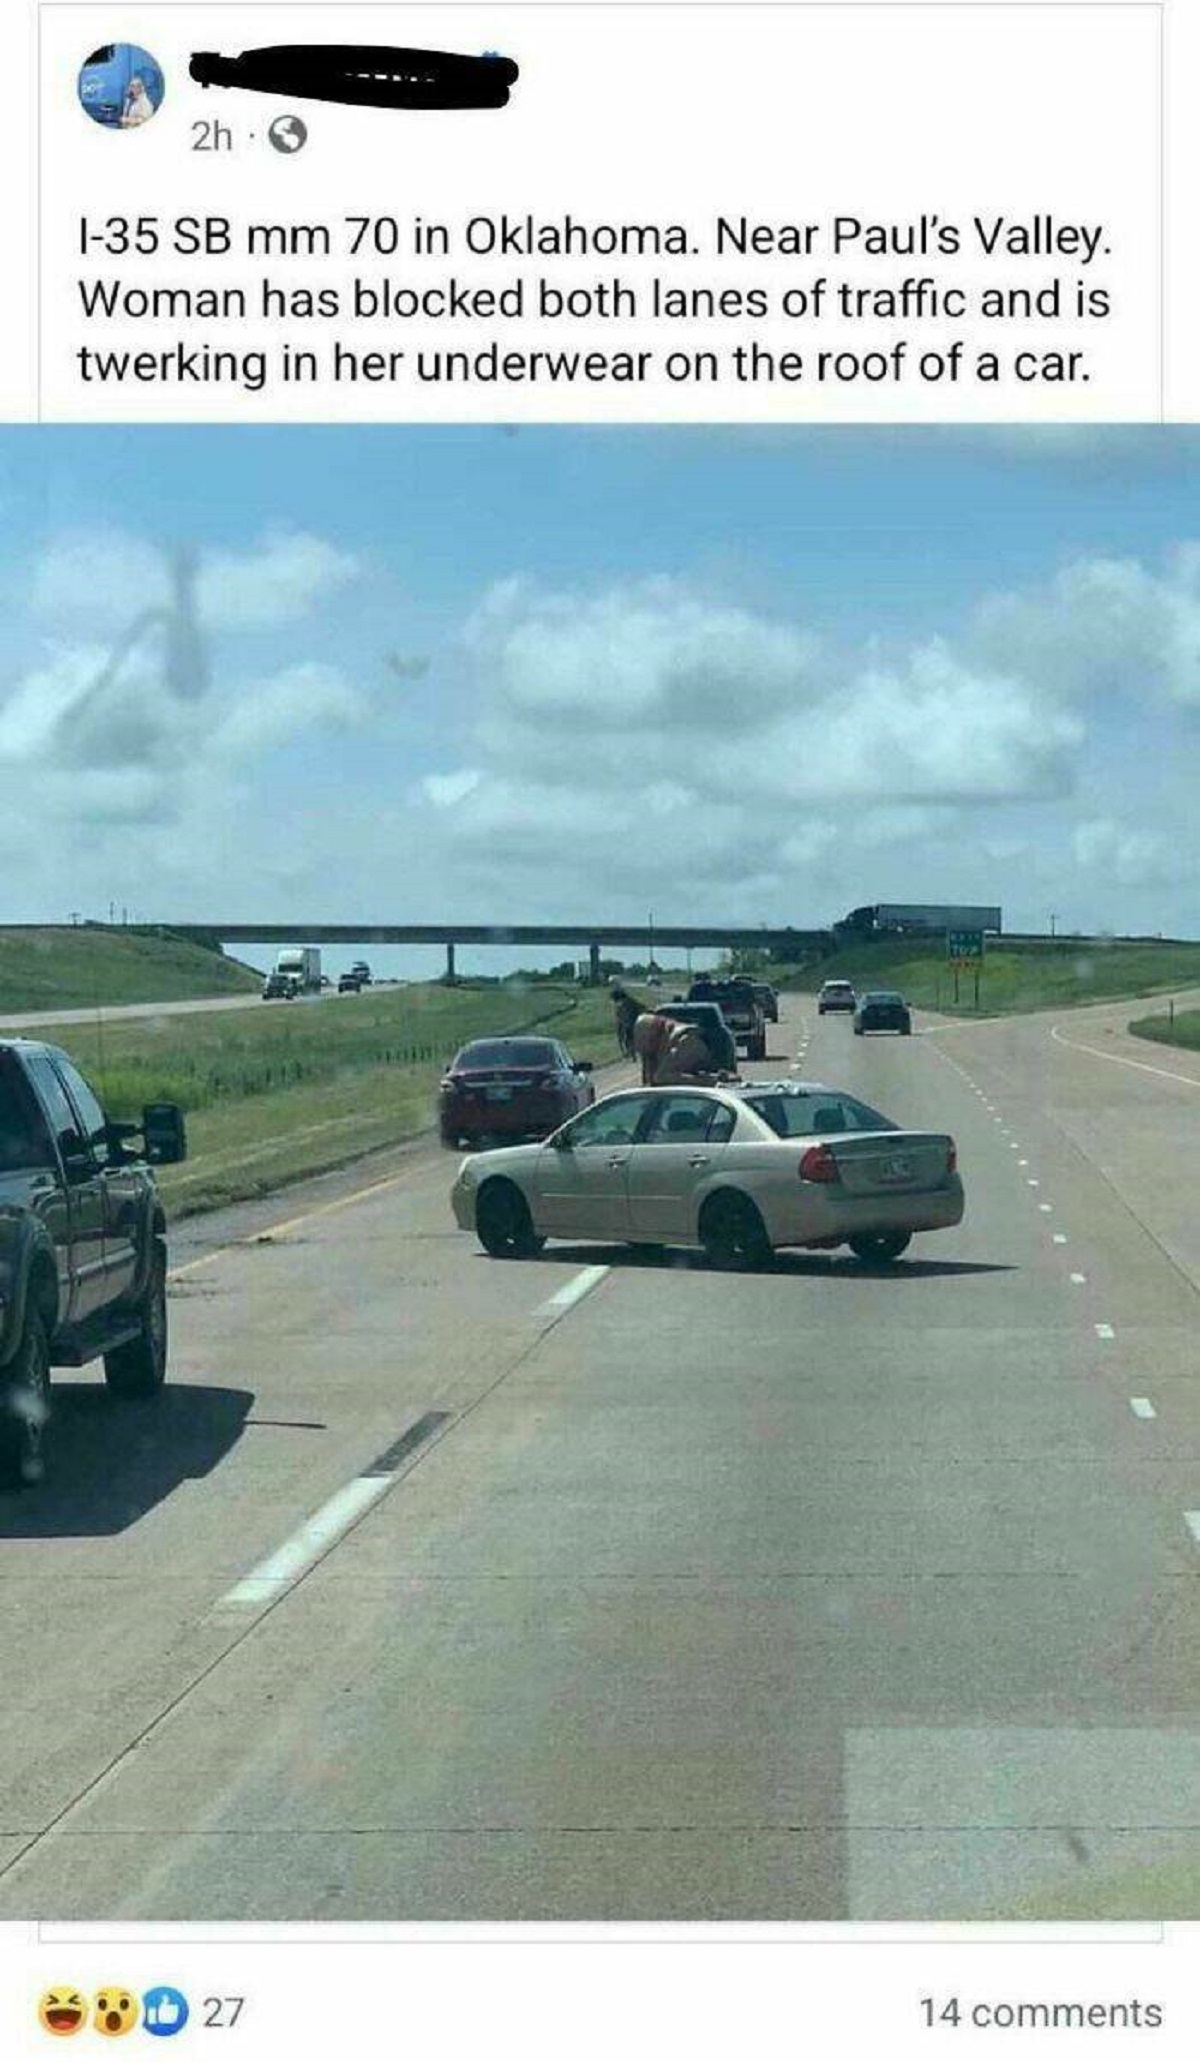 freeway - 2h3 I35 Sb mm 70 in Oklahoma. Near Paul's Valley. Woman has blocked both lanes of traffic and is twerking in her underwear on the roof of a car. 27 14